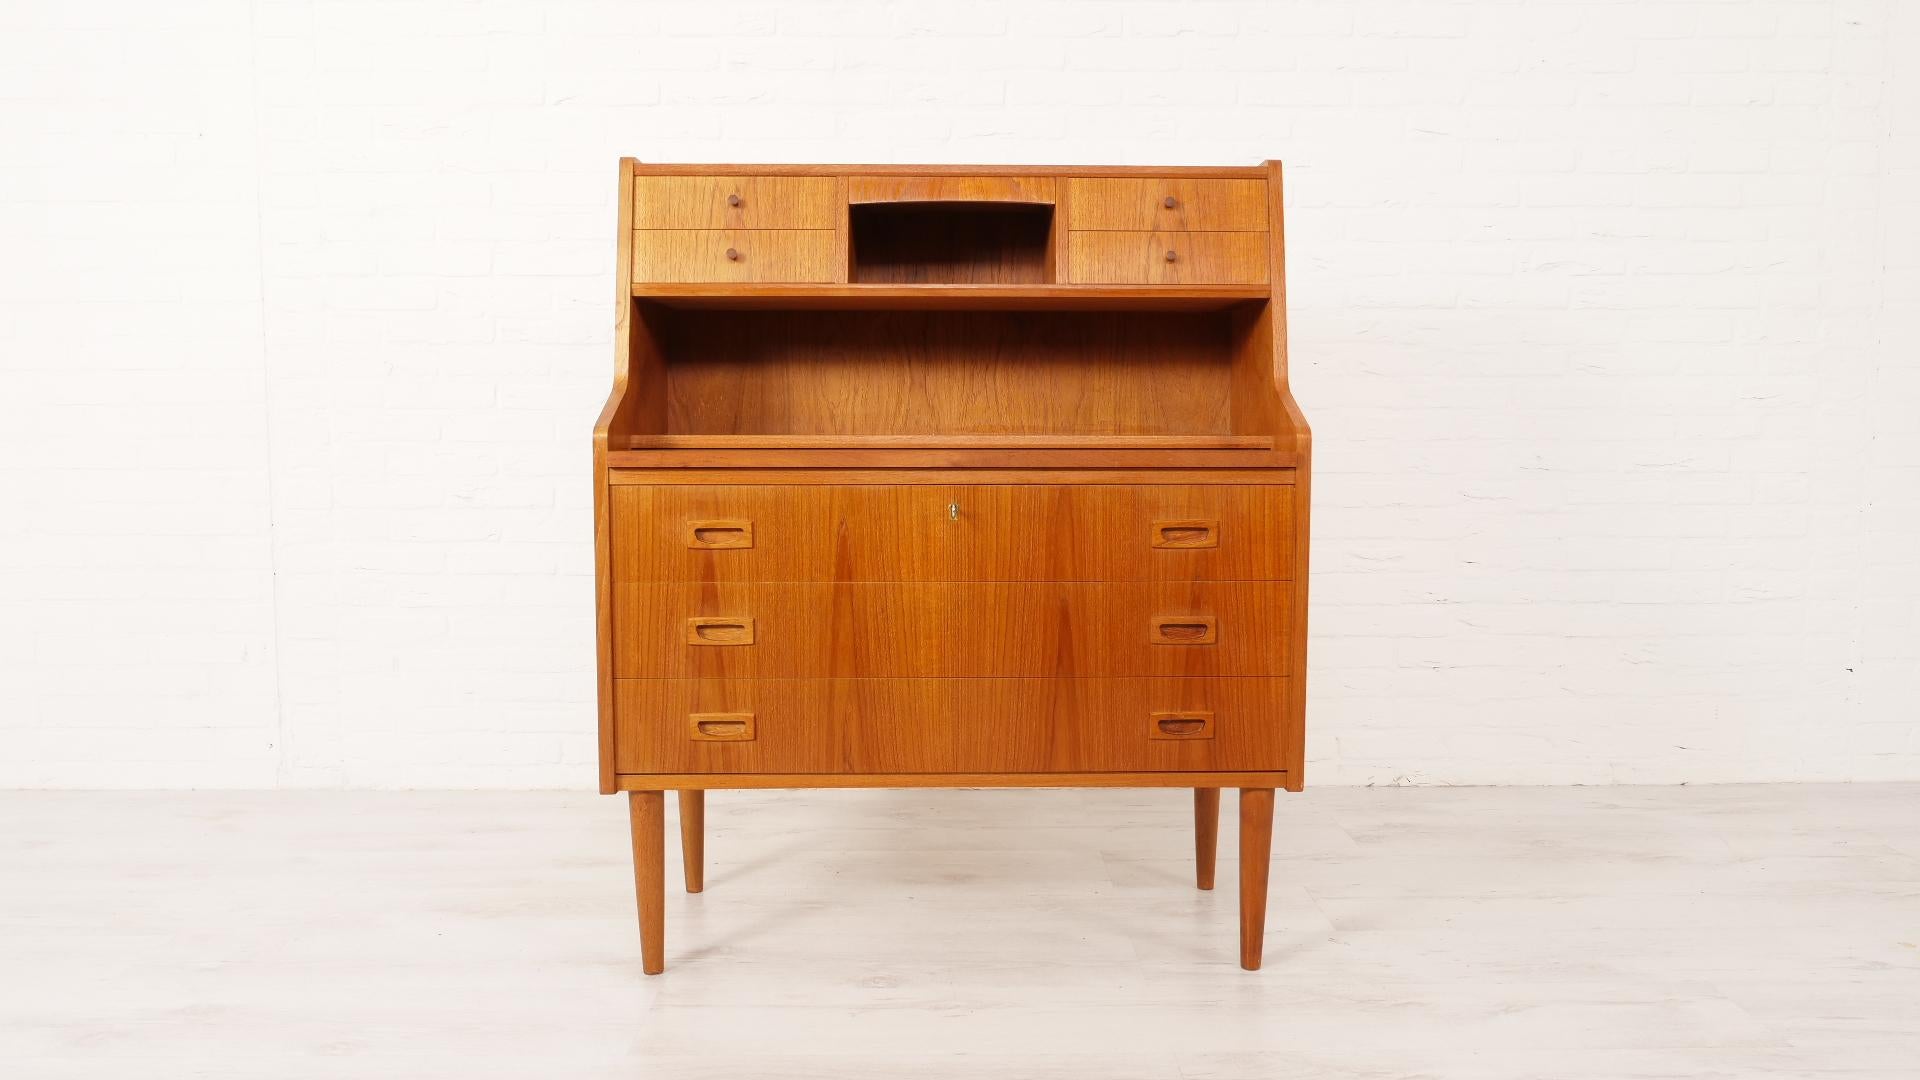 Beautiful secretary from the 1960s. The vintage teak cabinet has a pull-out desk, ideal! In addition, the cupboard has 4 drawers at the top and a mirror. So the cupboard can also be used as a vintage dressing table. At the bottom you will find 3